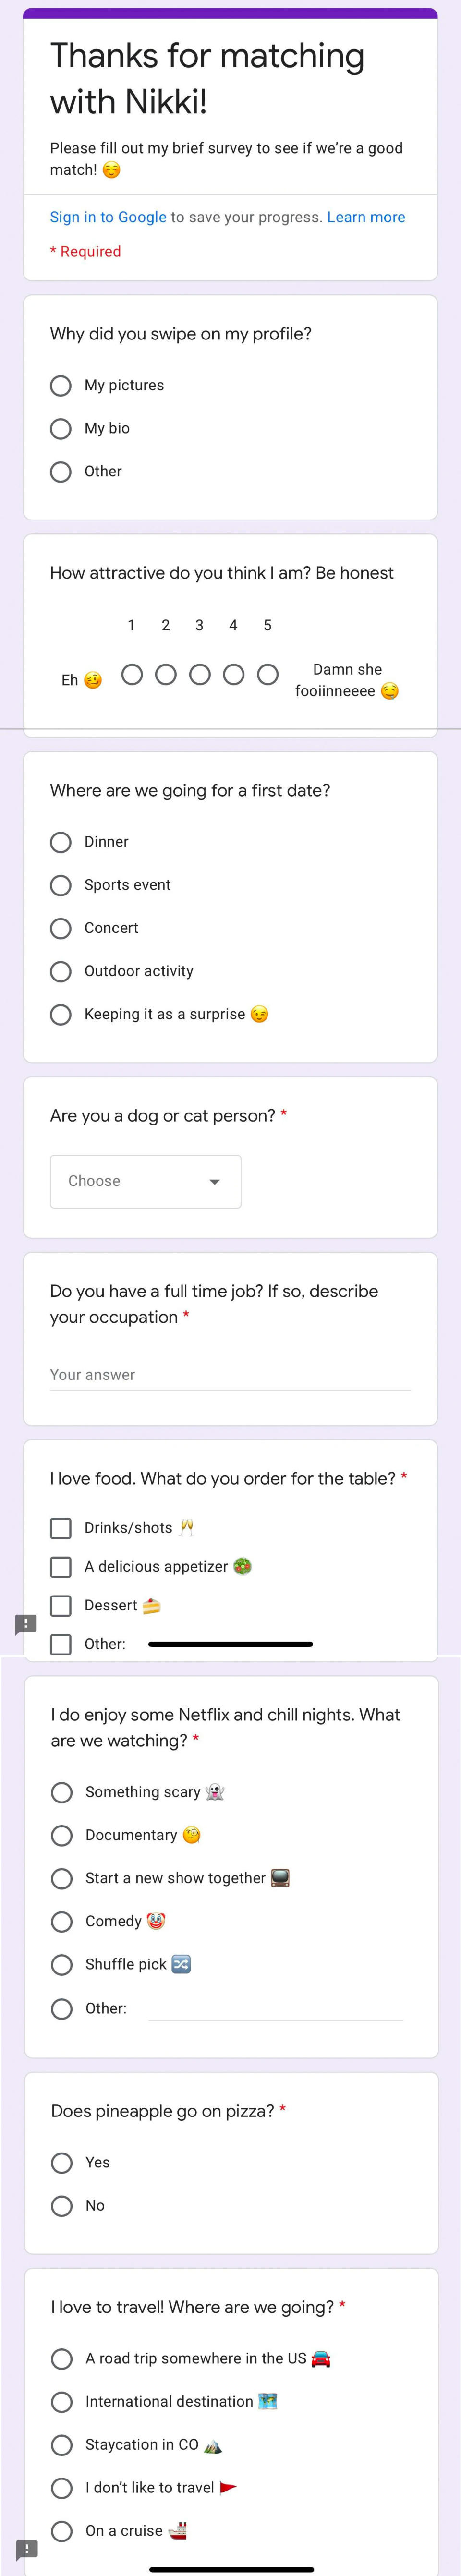 A survey titled "Thanks for matching with Nikki" that then asks several specific questions about where they would go on a date and what the person's interests are